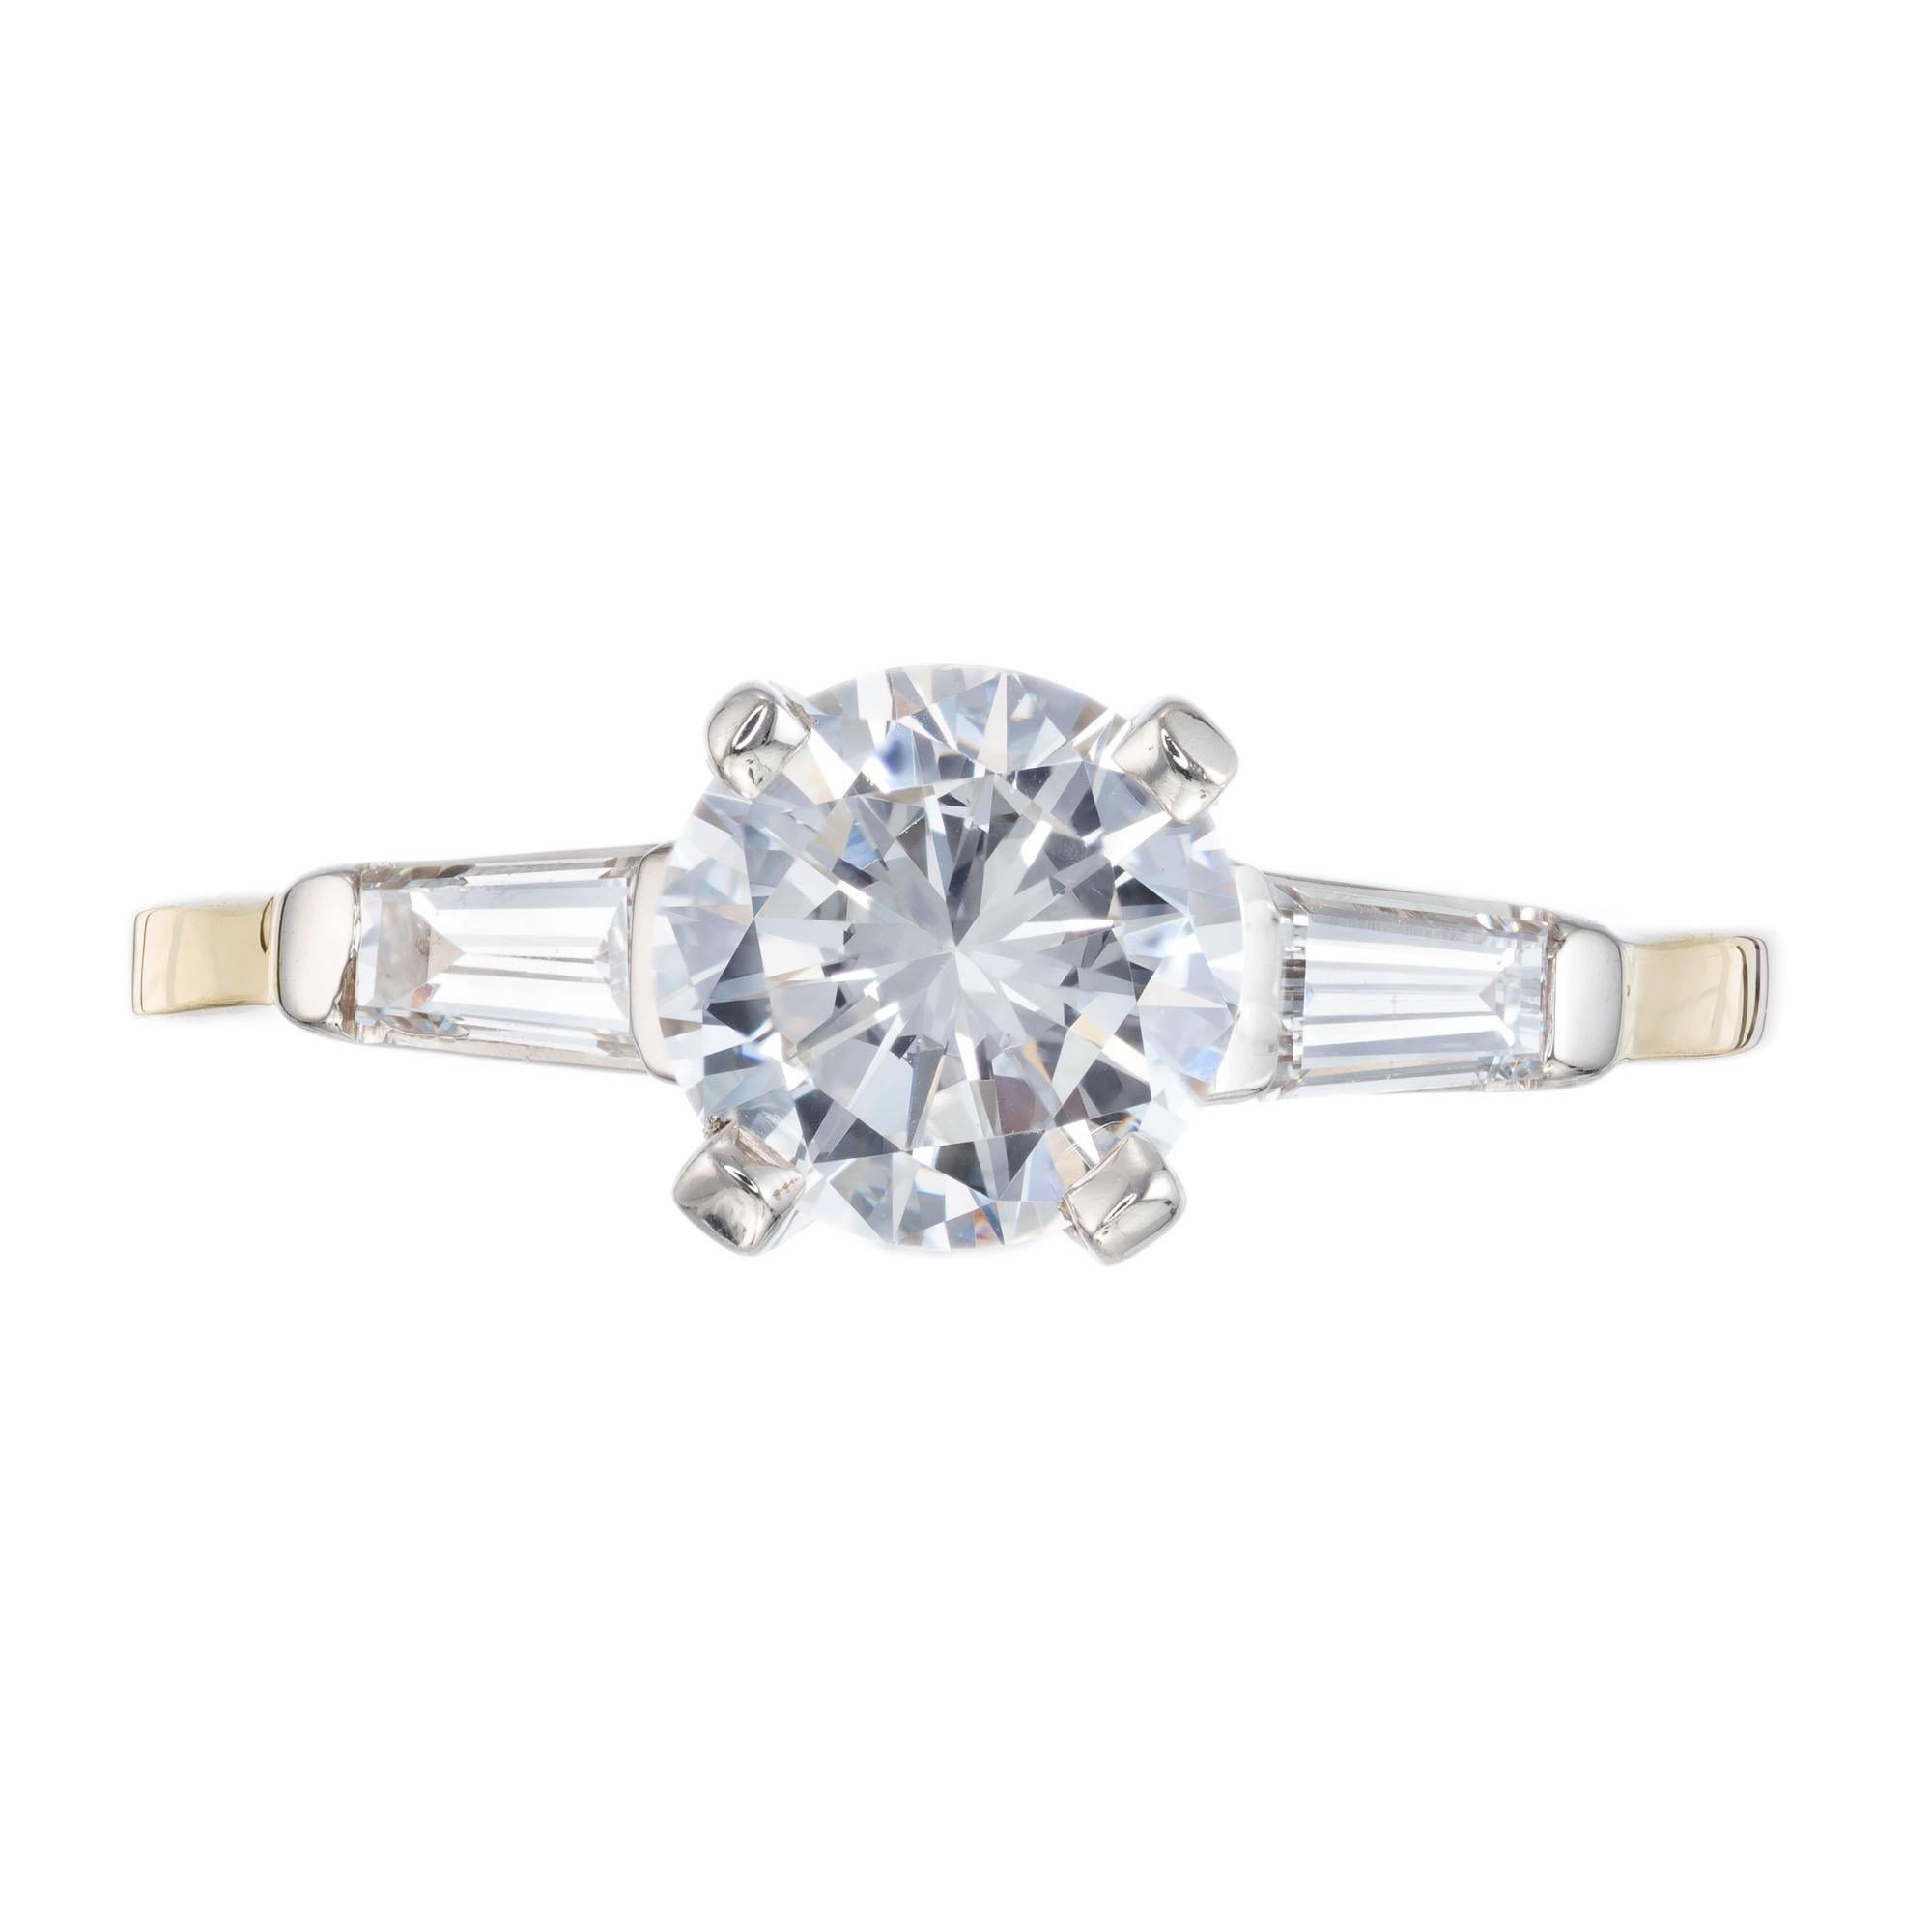 .90ct round center diamond in a three-stone engagement setting. 14k white and yellow gold with 2 tapered baguette side diamonds.  EGL certified. Circa 1940-1950.

1 round brilliant cut diamond, approx. total weight .90cts, F to G, VS2, 6.16 x 6.14 x